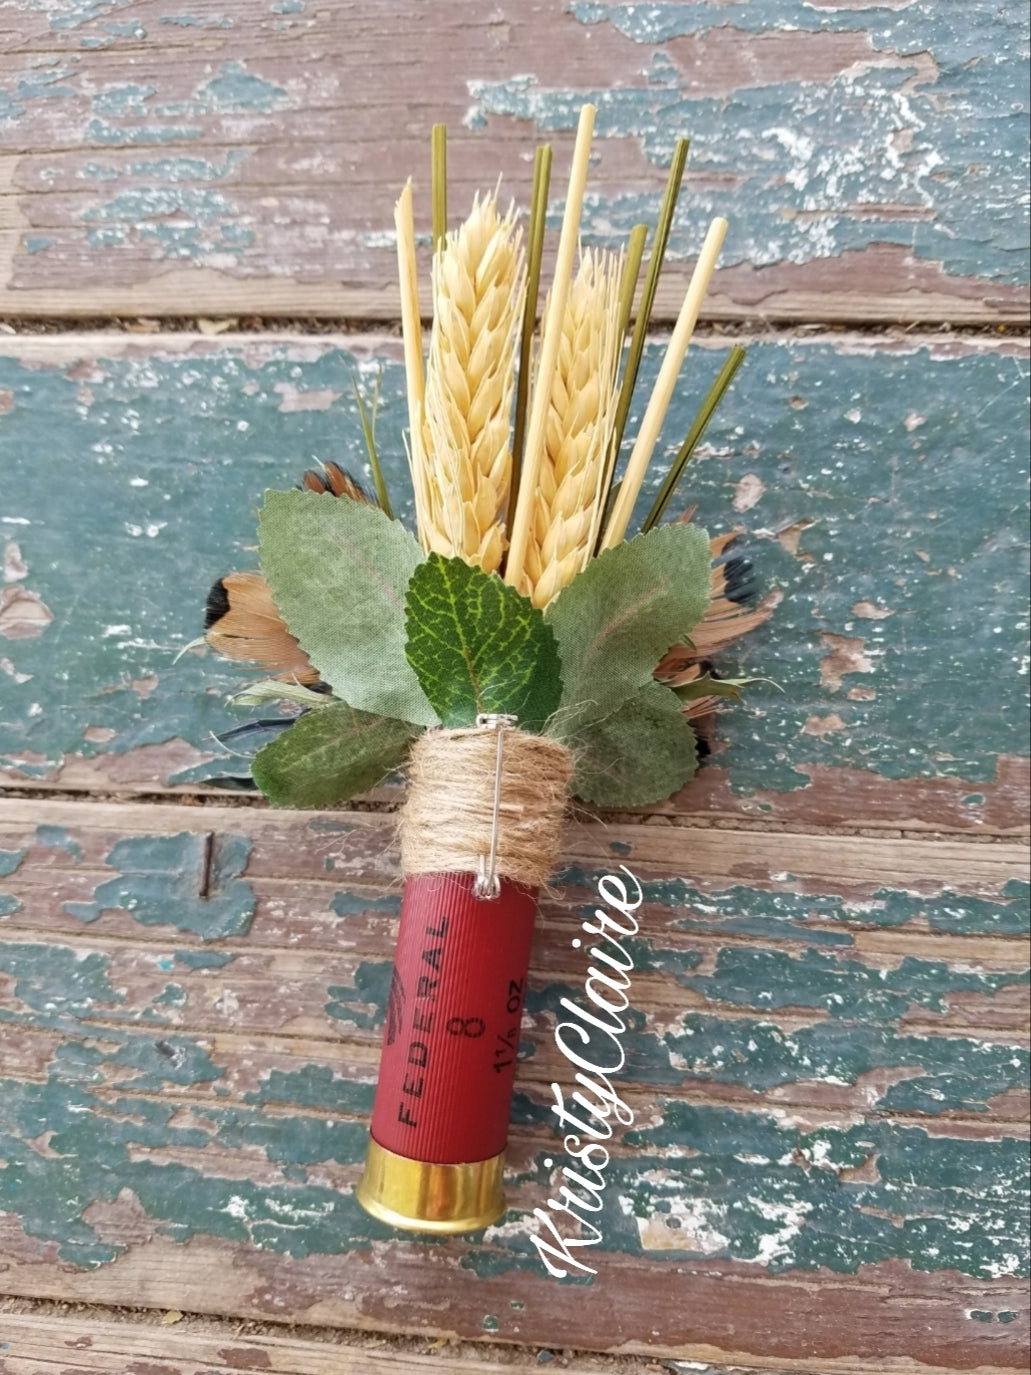 Burgundy Shotgun Shell Boutonniere, Burgundy Paper Flower, lapel, buttonhole, pin-on, corsage, Dried Wheat, Grass, Thistle, Pheasant Feathers